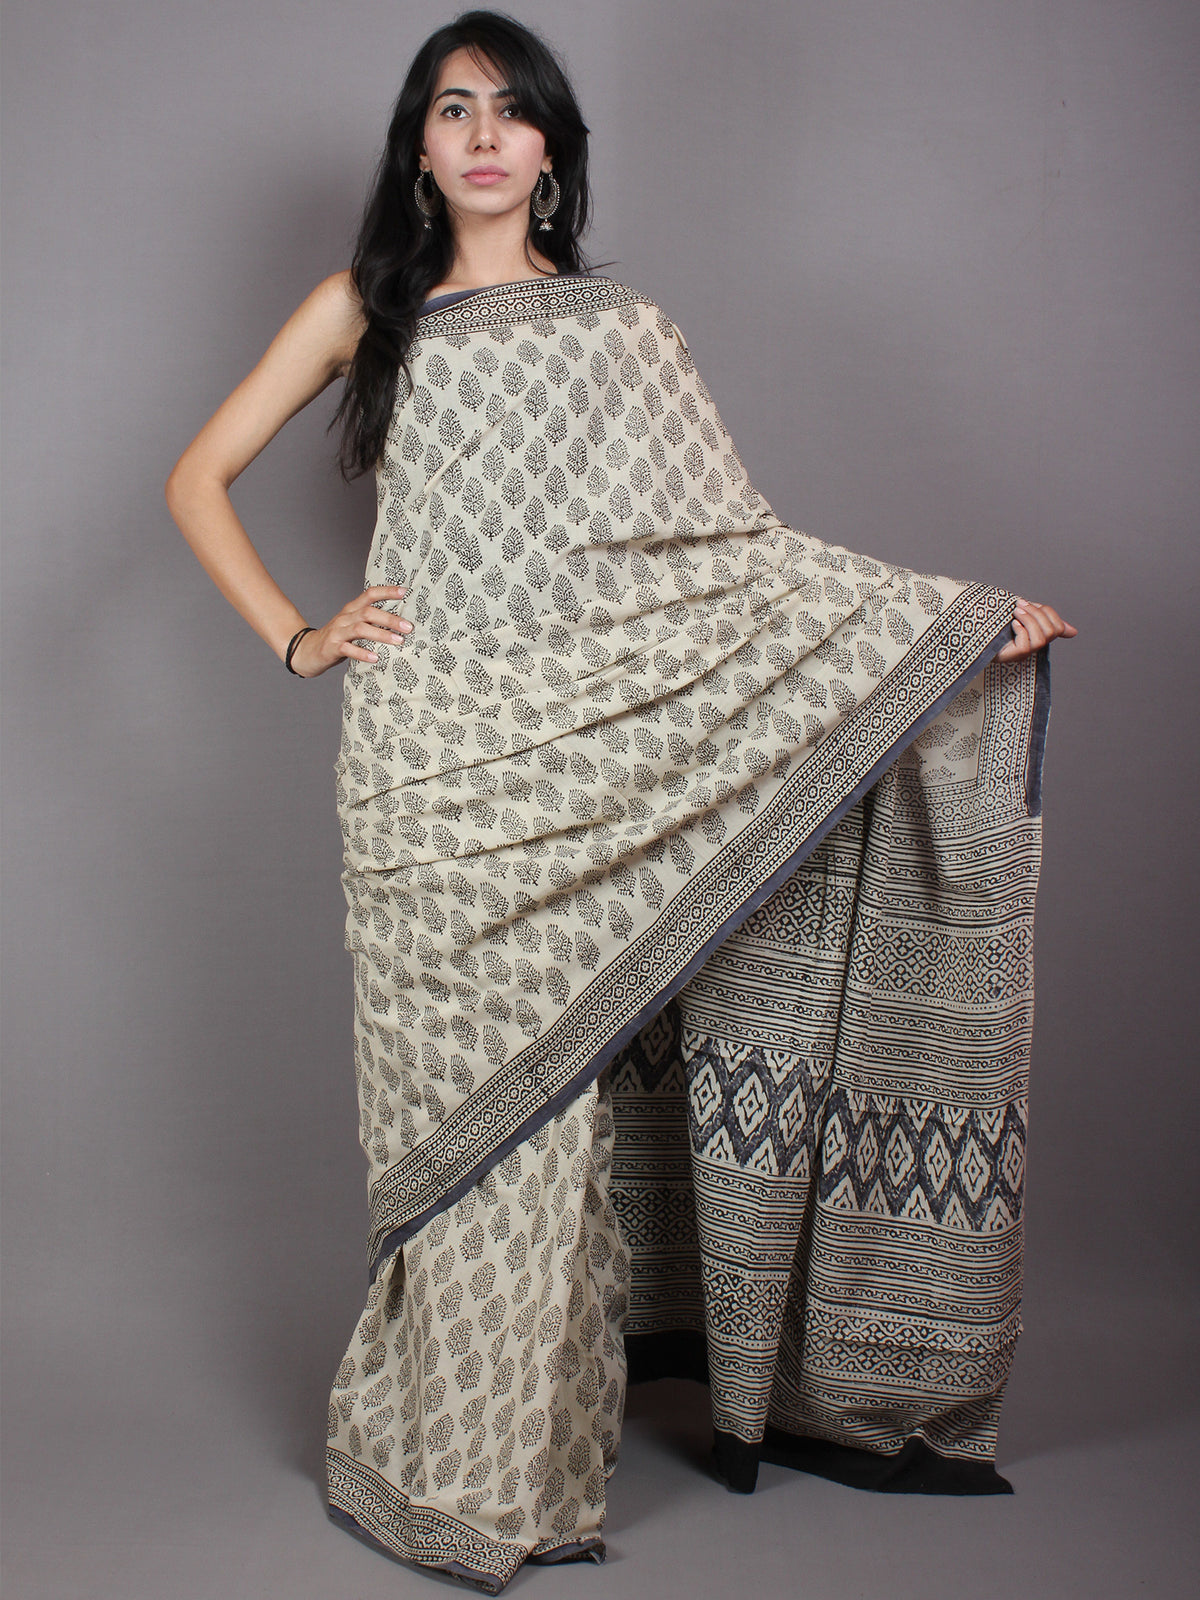 Beige Black Cotton Hand Block Printed Saree in Natural Colors - S03170531